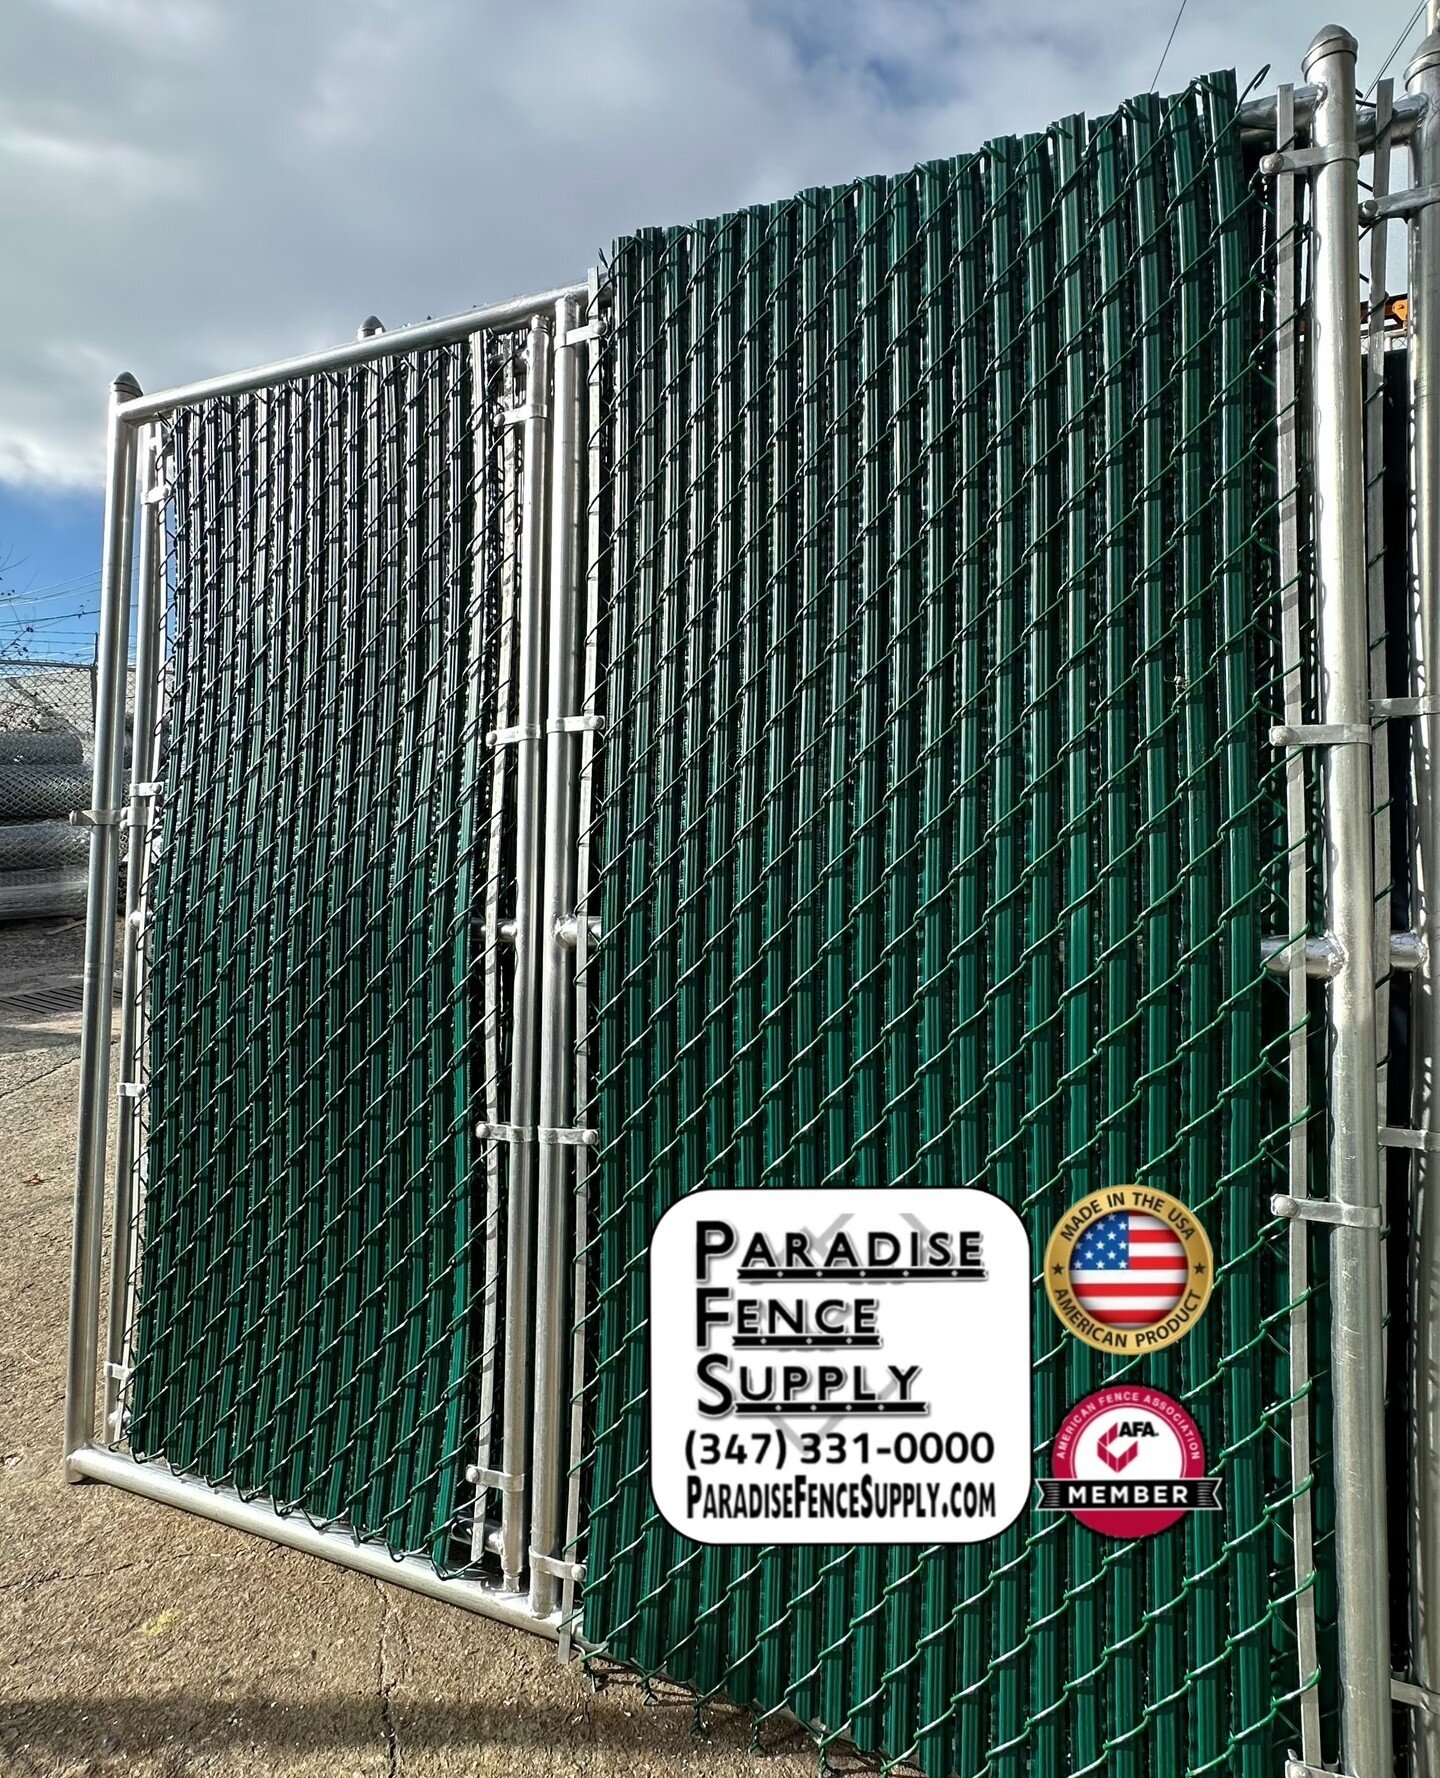 Custom Fabrication:A one-piece chain-link fence panel with an integrated walk gate, with privacy slats pre-installed. This item was manufactured according to customer specifications in our shop. Contact us today for all your custom fence needs. (347)